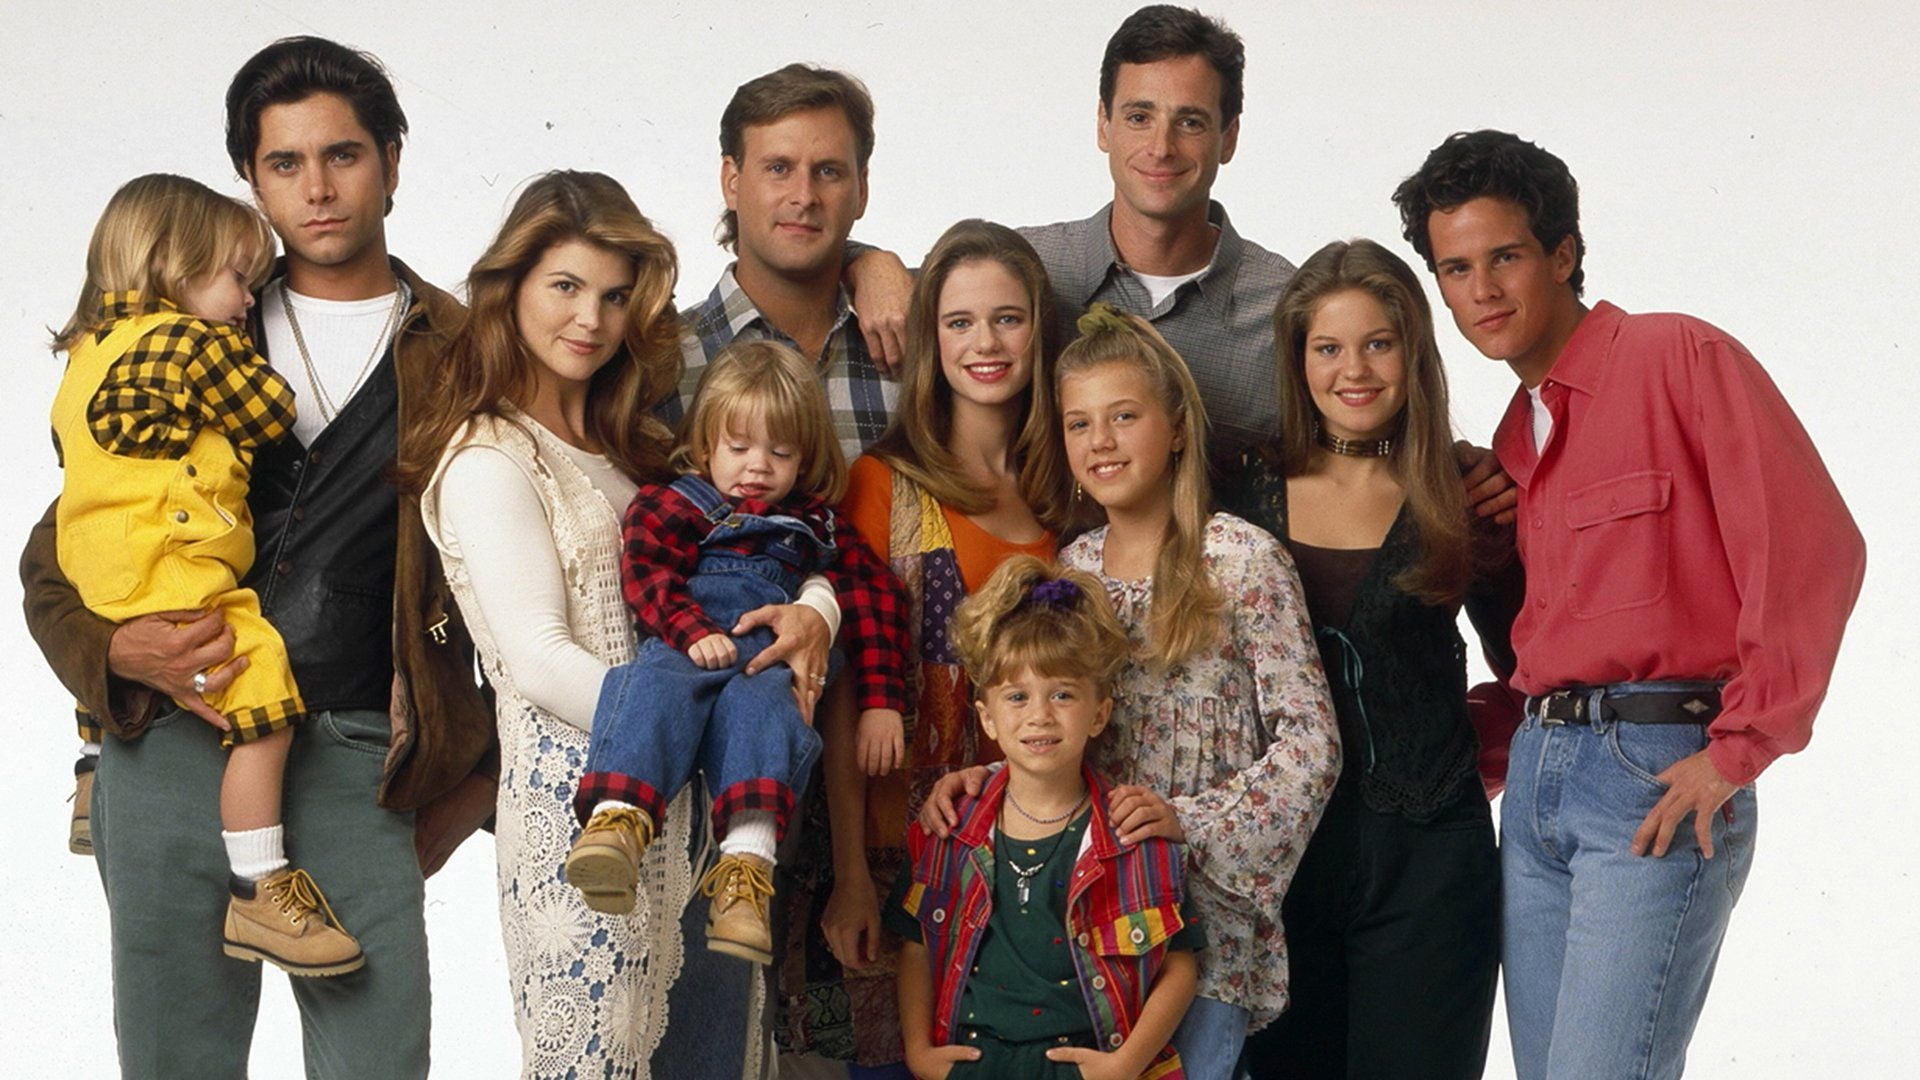 Full House: The Complete Series - Seasons 1-8